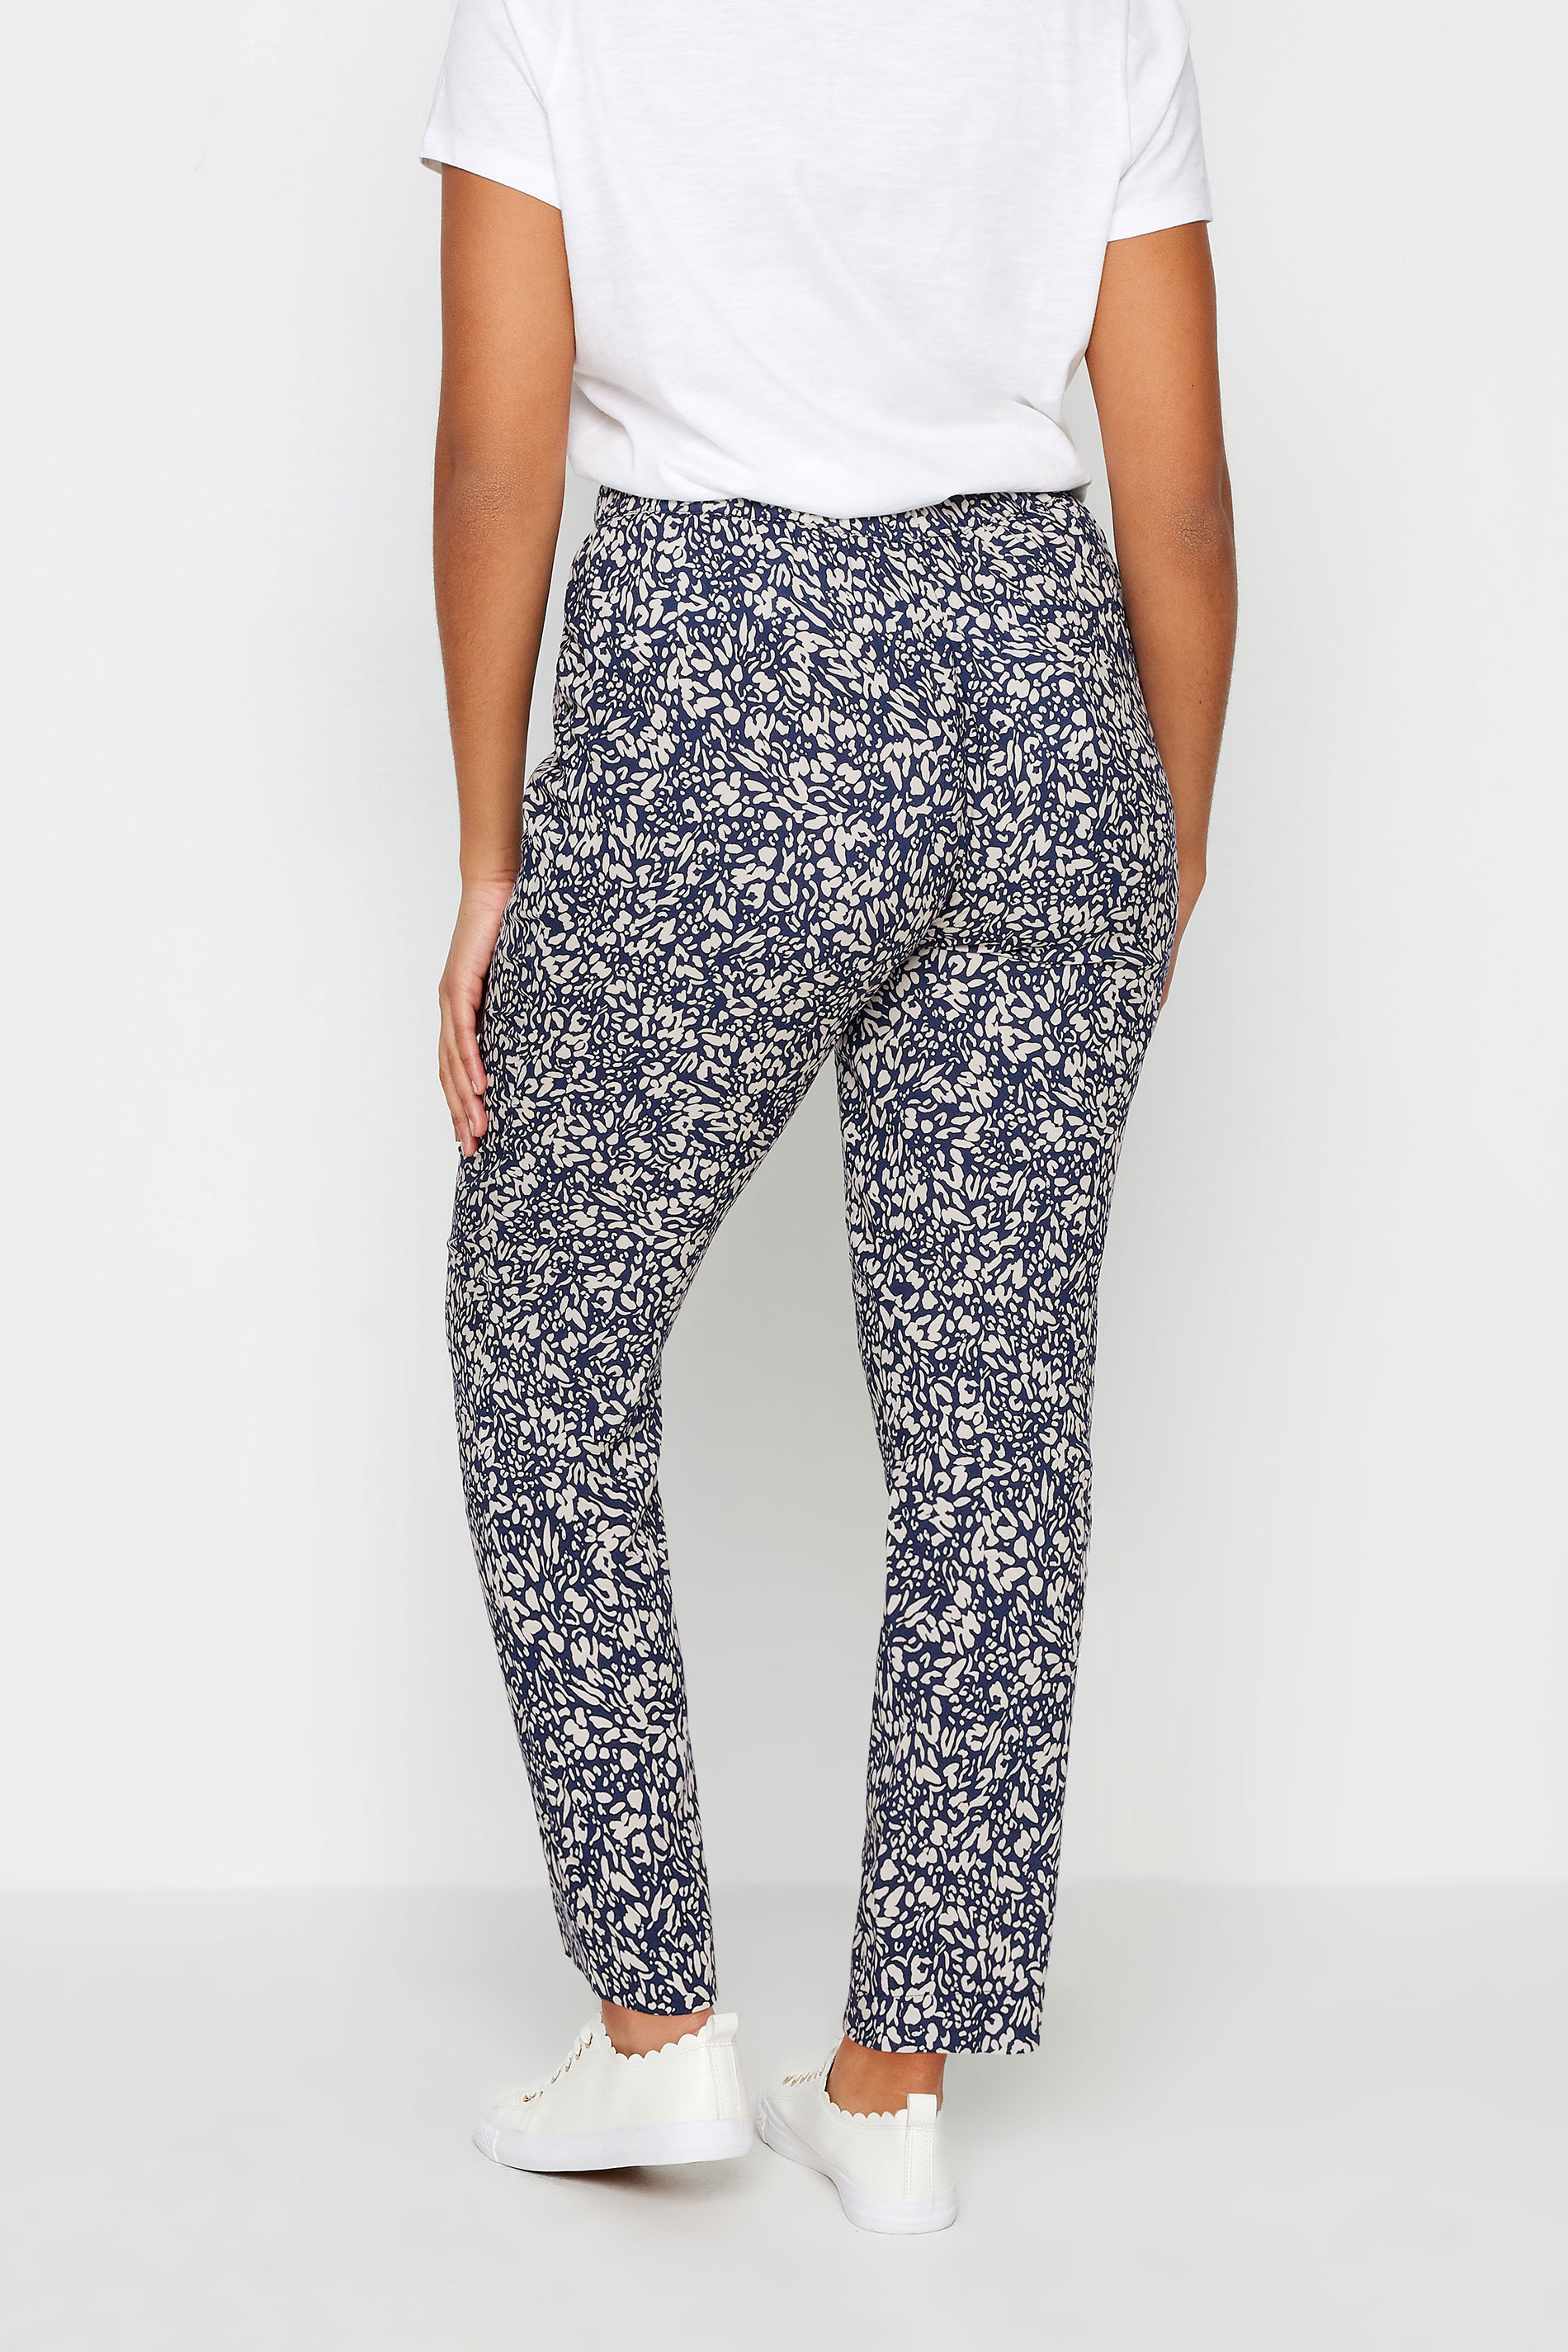 M&Co Navy Blue & Ivory Markings Print Trousers | M&Co 3